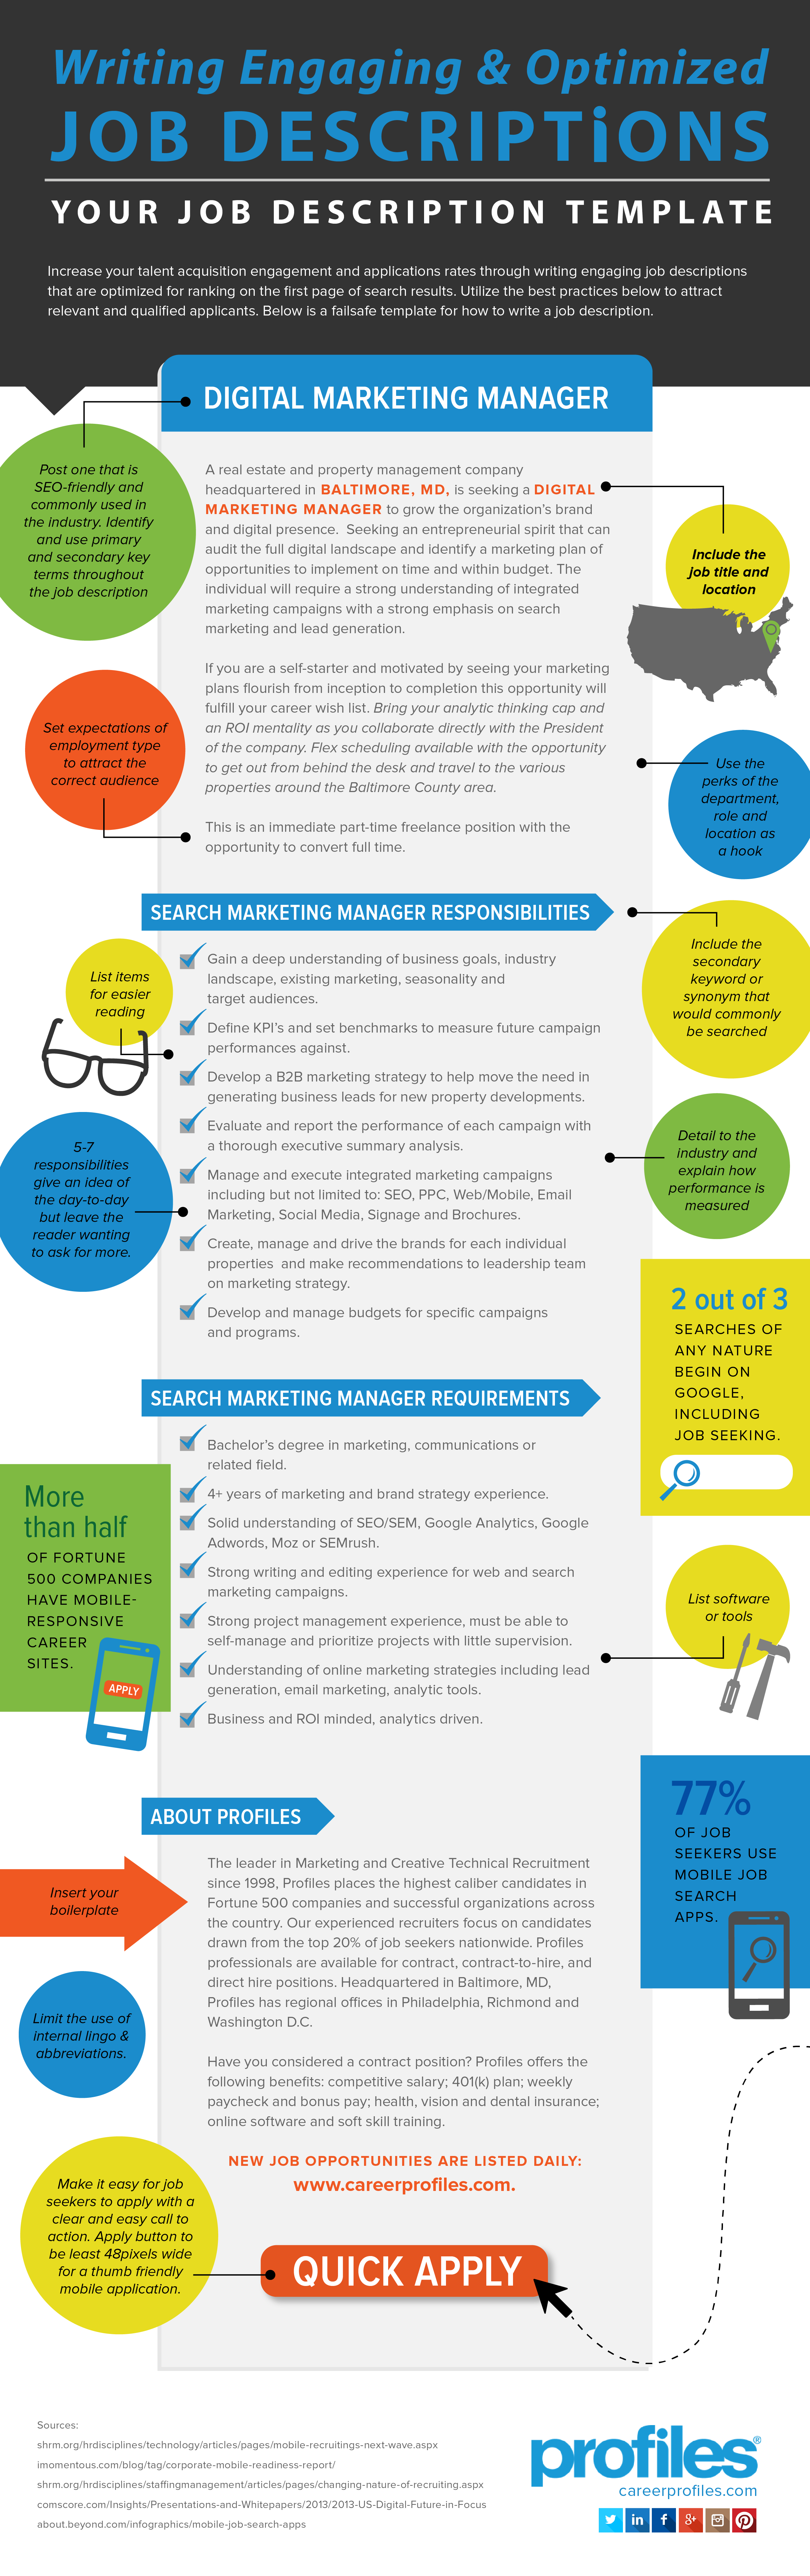 Profiles Managed Services Infographic